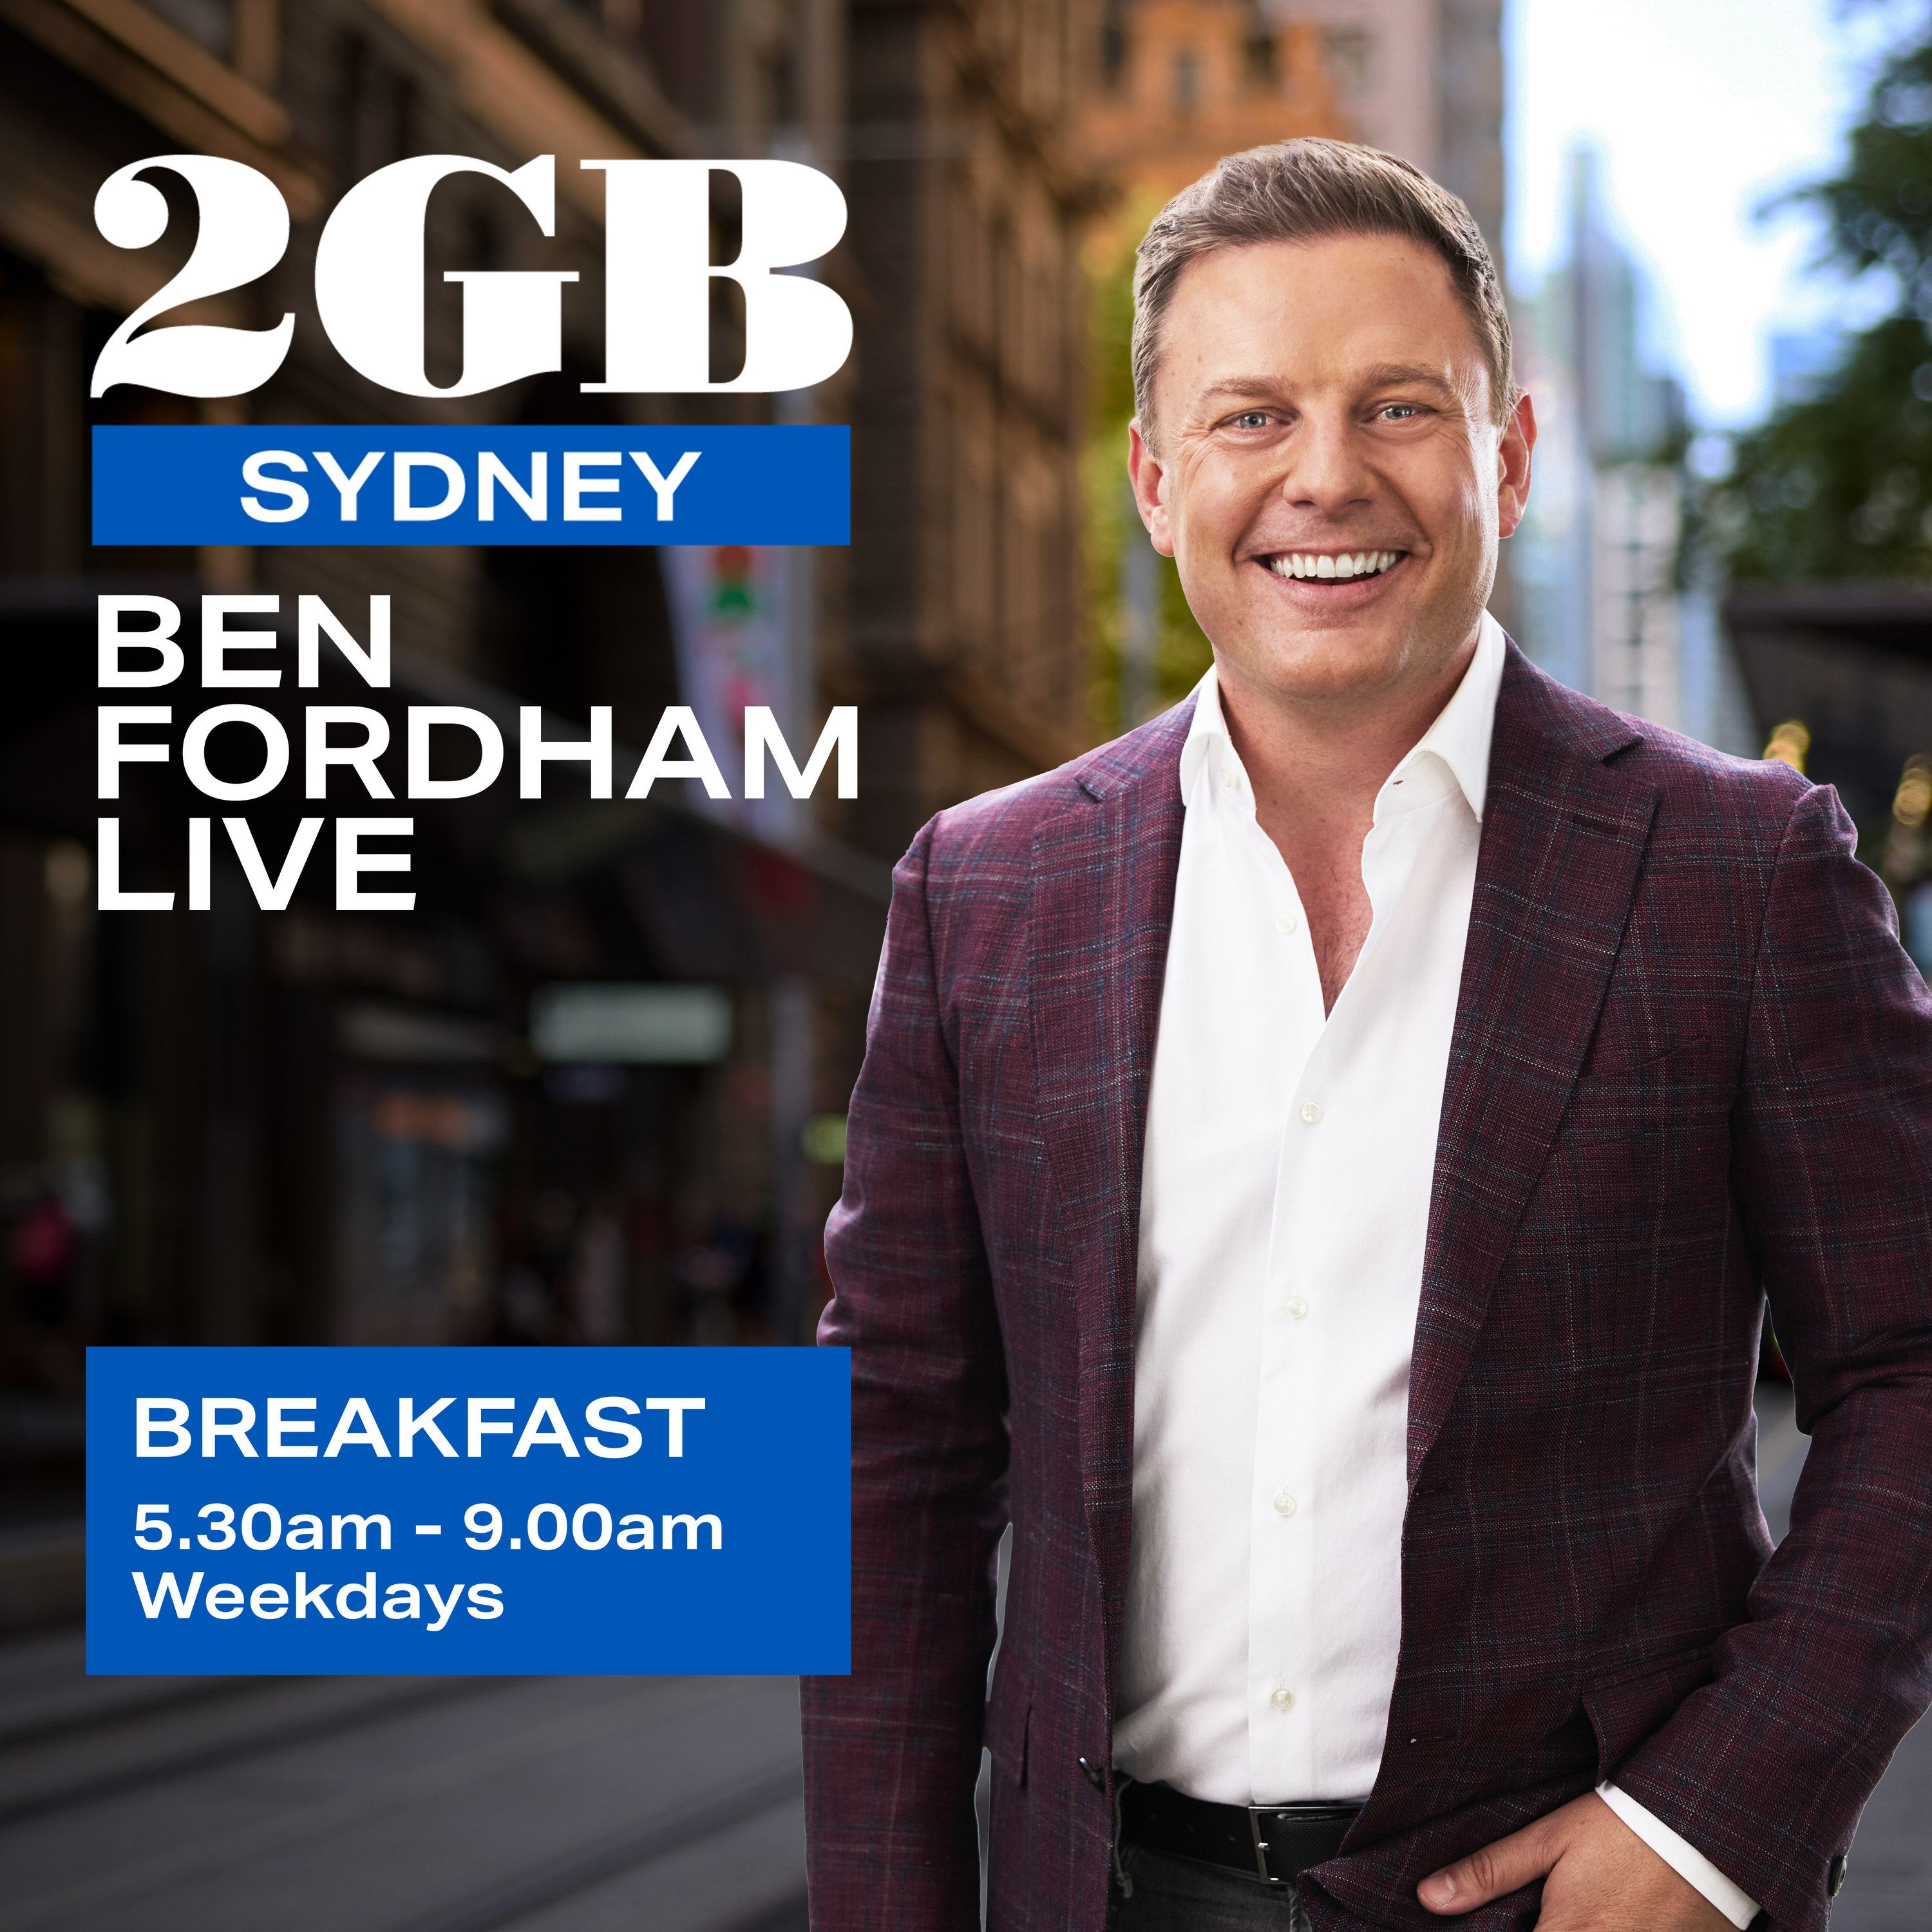 The bizarre issue impacting Ben Fordham bus posters